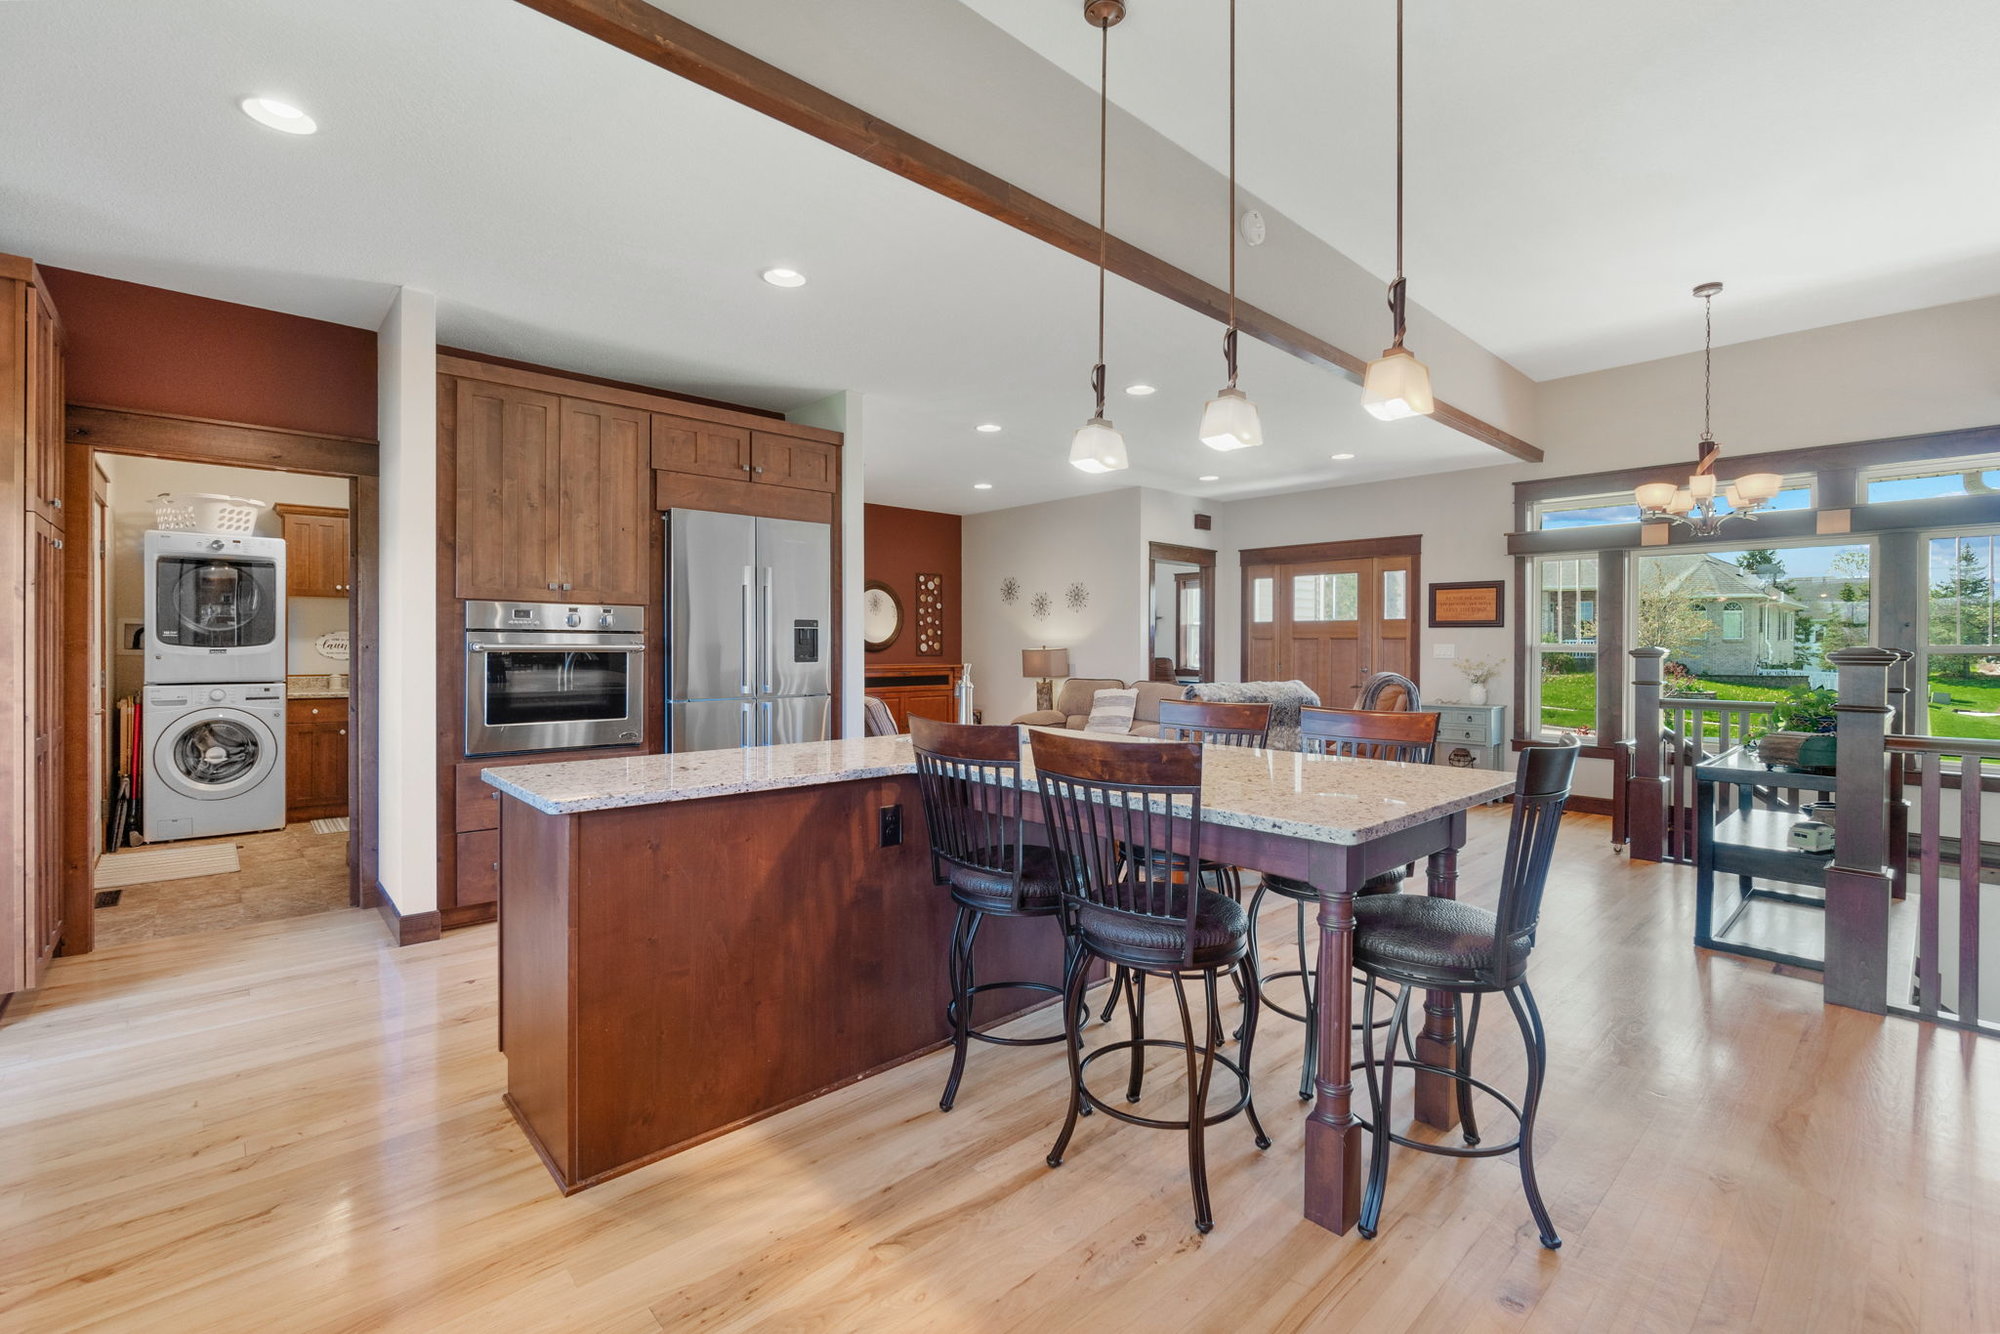 Simply Stunning Qualities Can Be Found Throughout this Home in Cedar Falls, Iowa